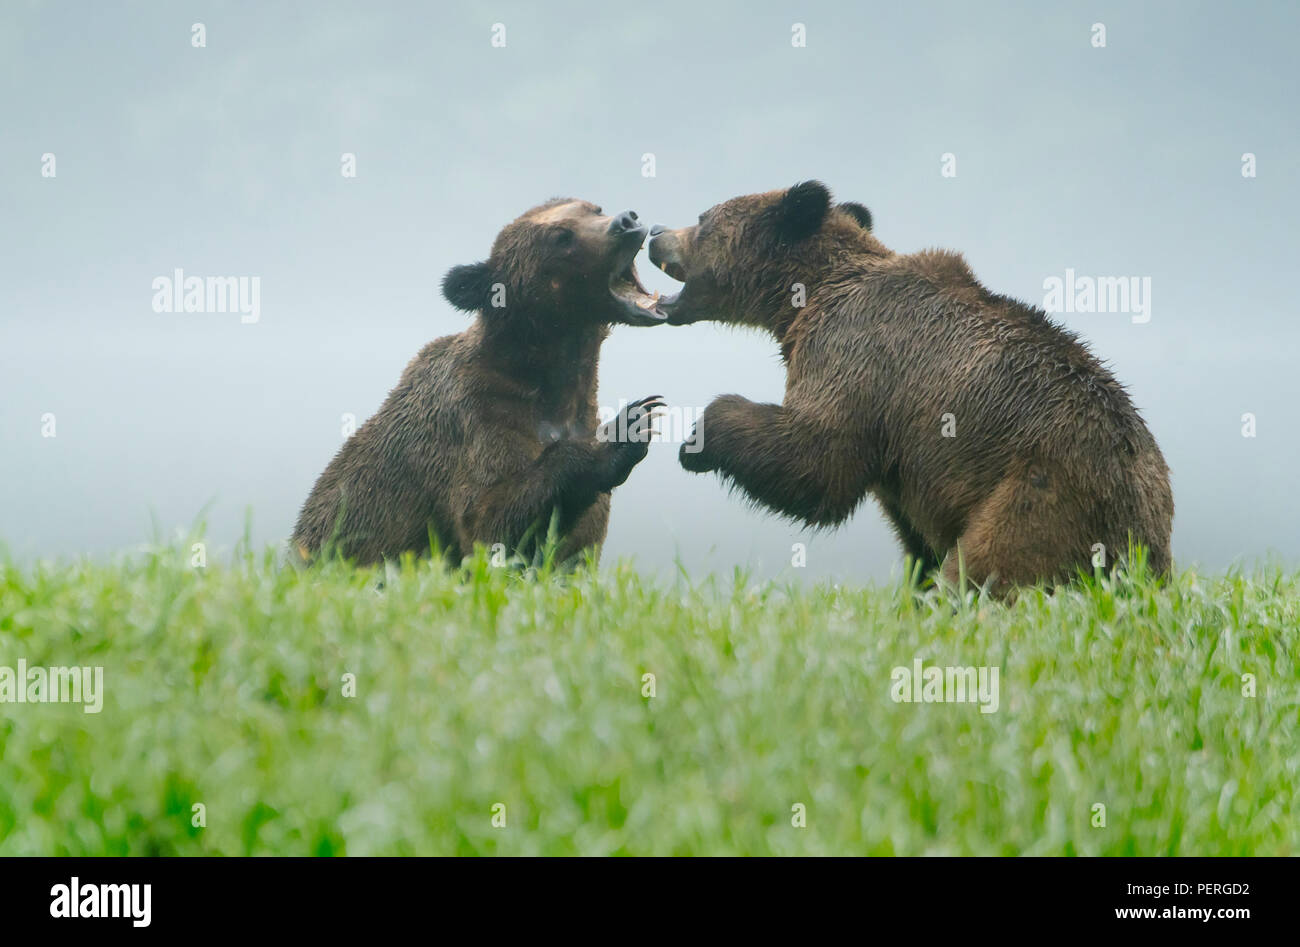 Grizzly Bears (Ursus arctos) Play-fighting in misty valley, Khutzeymateen Grizzly Bear Sanctuary, Great Bear Rainforest, BC, Canada Stock Photo